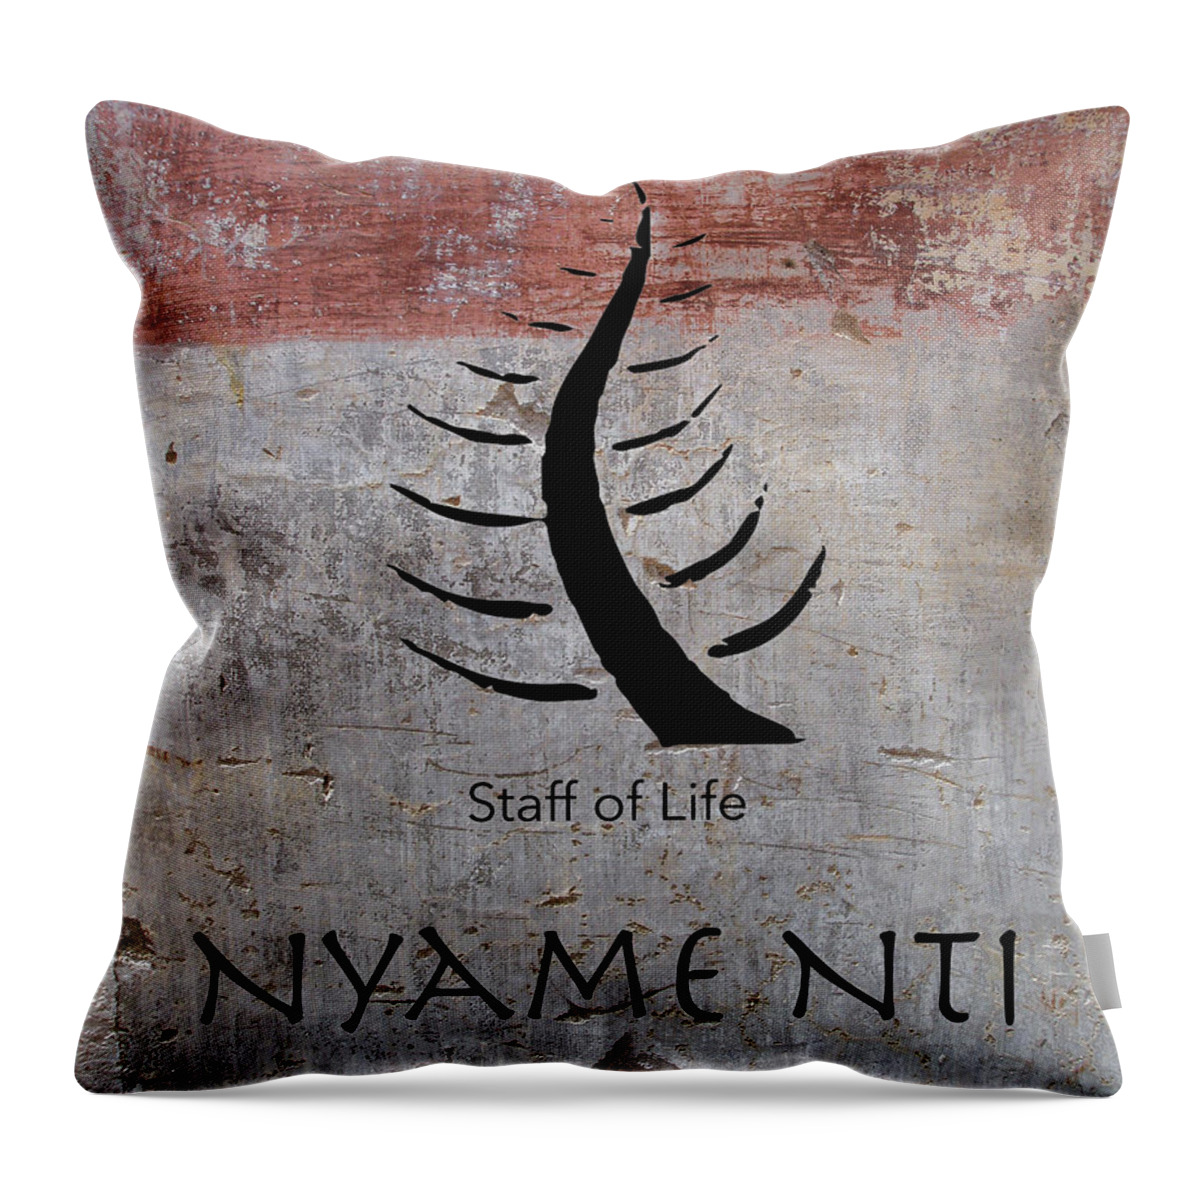 West African Art Throw Pillow featuring the digital art Nyame Nti Adinkra Symbol by Kandy Hurley